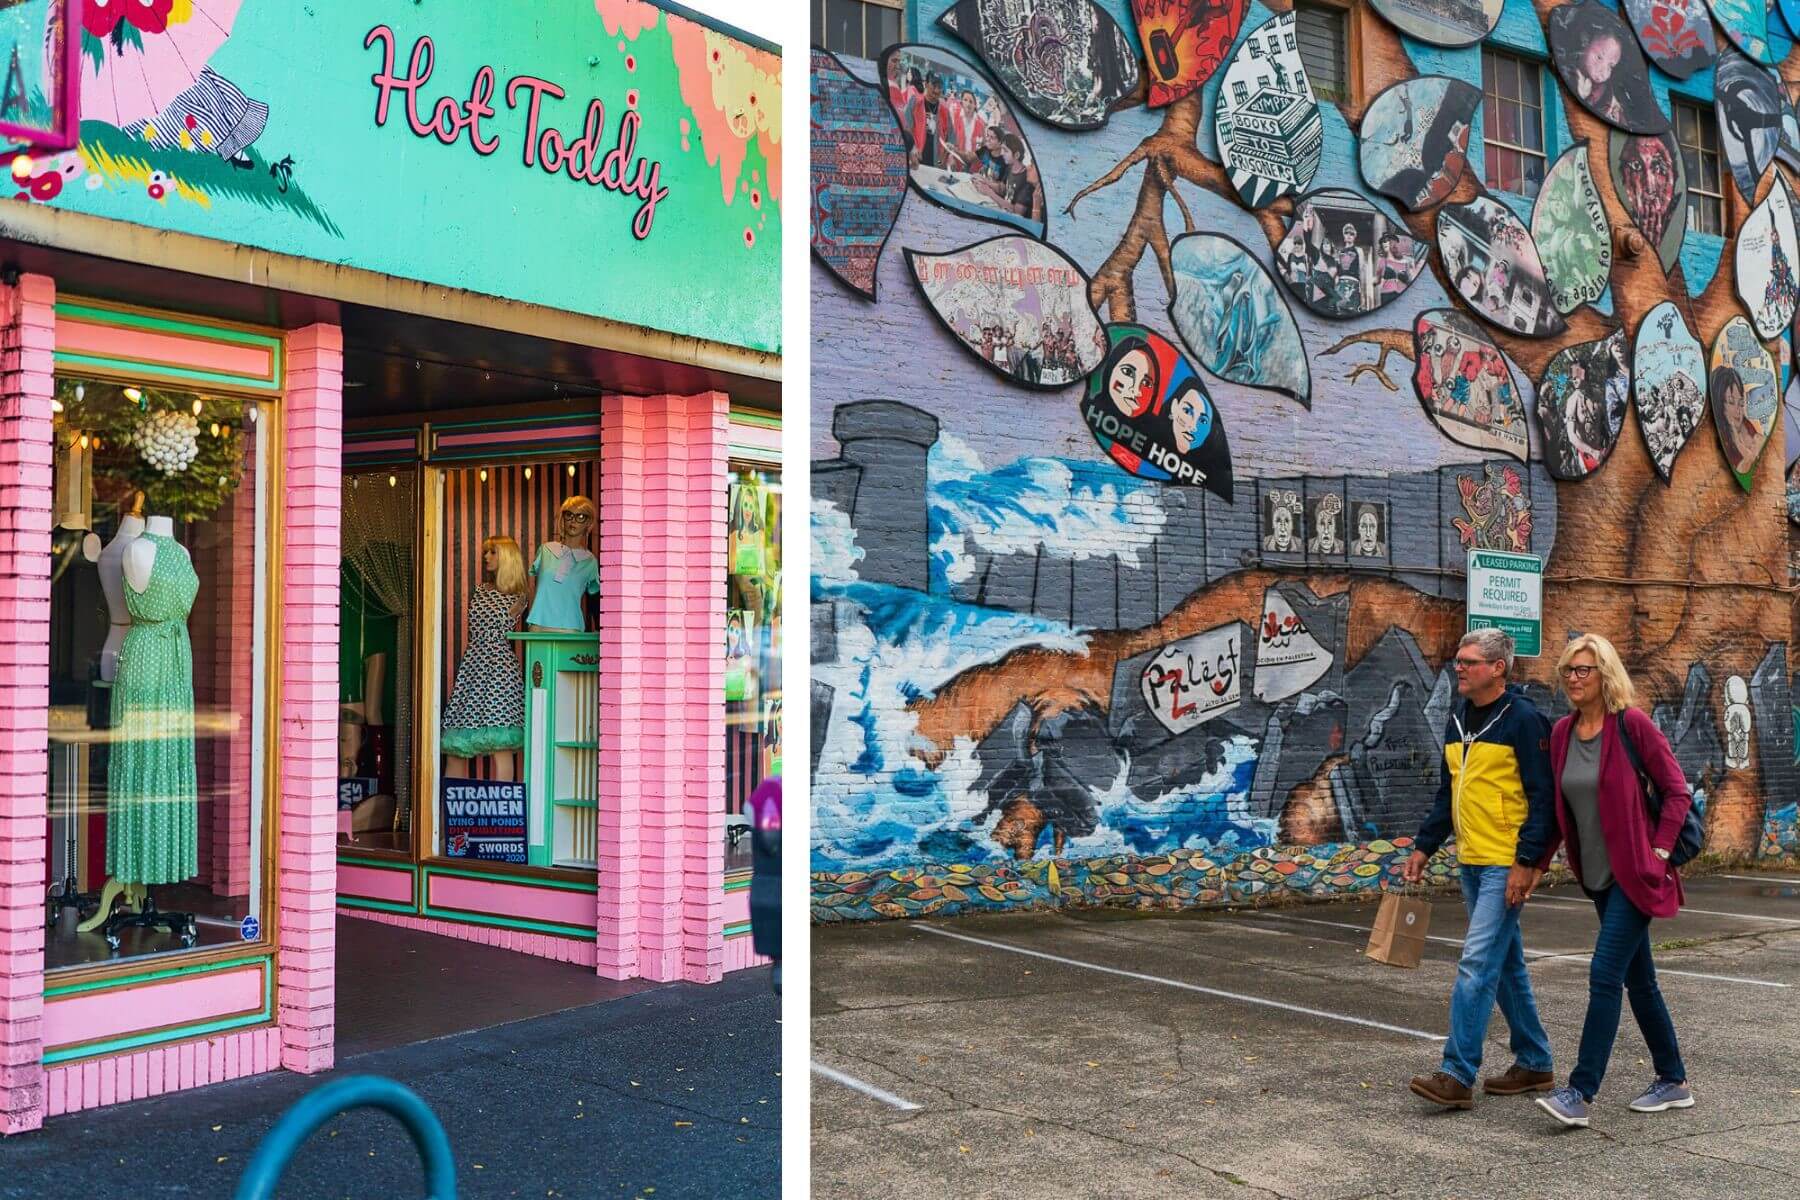 Left: The pink and green exterior or Hot Toddy clothing store. Right: A man and women hold hands and walk past a mural depicting a large tree with painted leaves. 